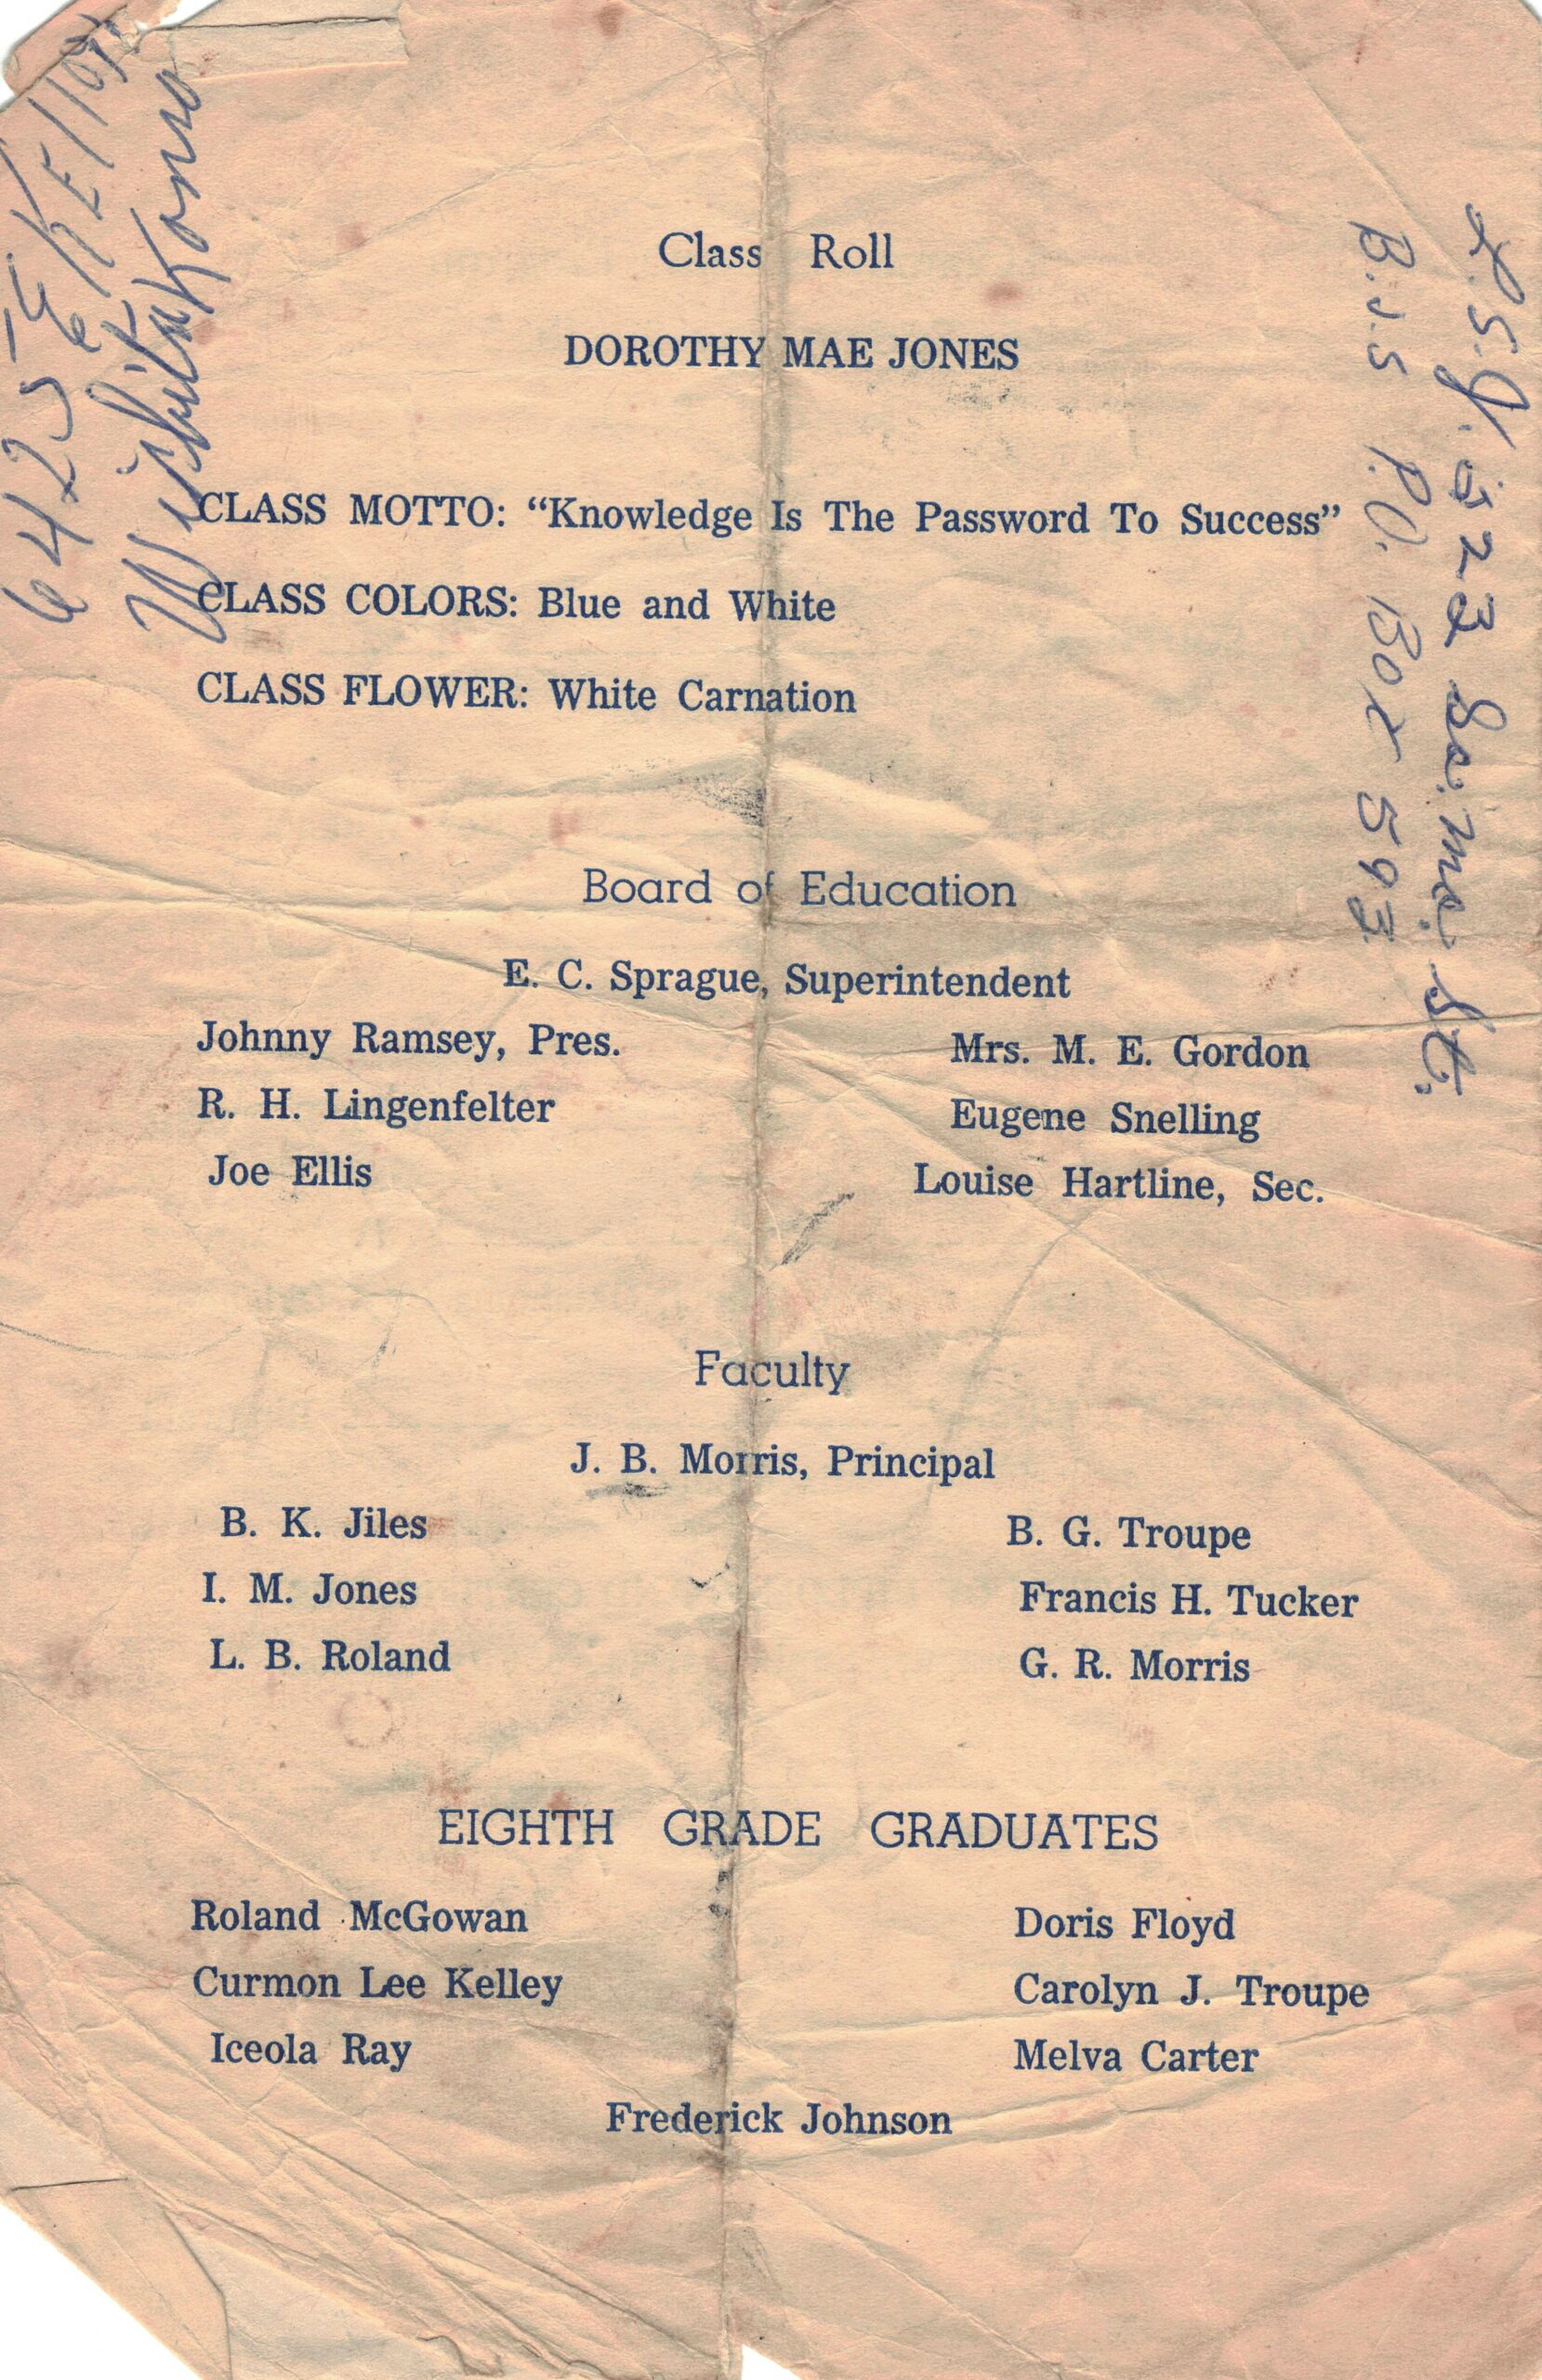 Backk page of the 1955 Lincoln graduation program detailing graduating class and board of education information.